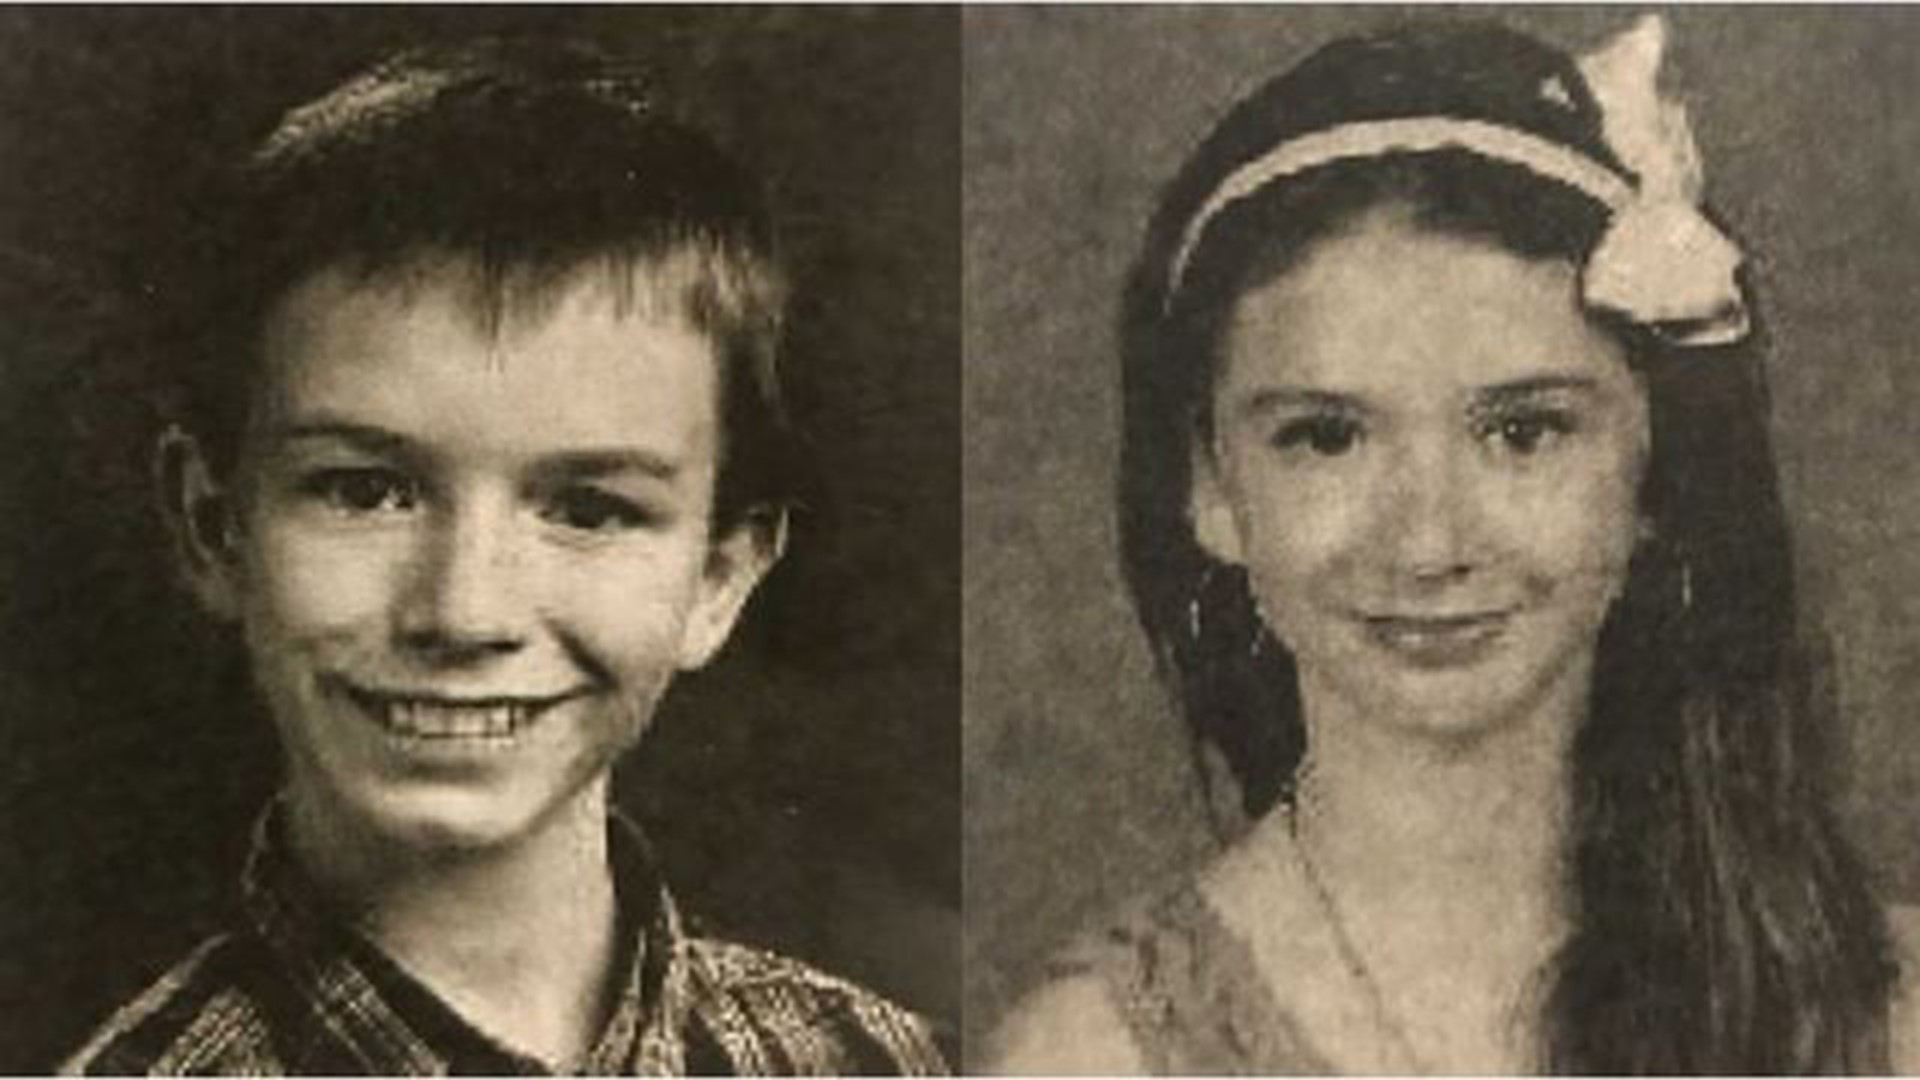 A Georgia sheriff's office says the bodies of two children, 14-year-old Mary Crocker and her brother, 15-year-old Elwyn Crocker, have been found buried behind their Guyton home.